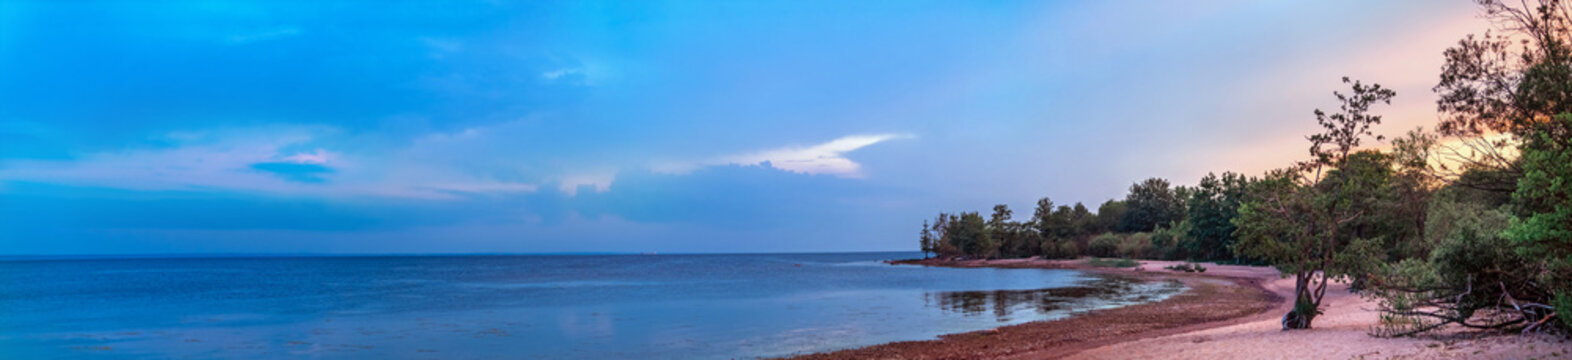 Panoramic view of the coast of the Gulf of Finland at sunset, Kotlin island, Russia